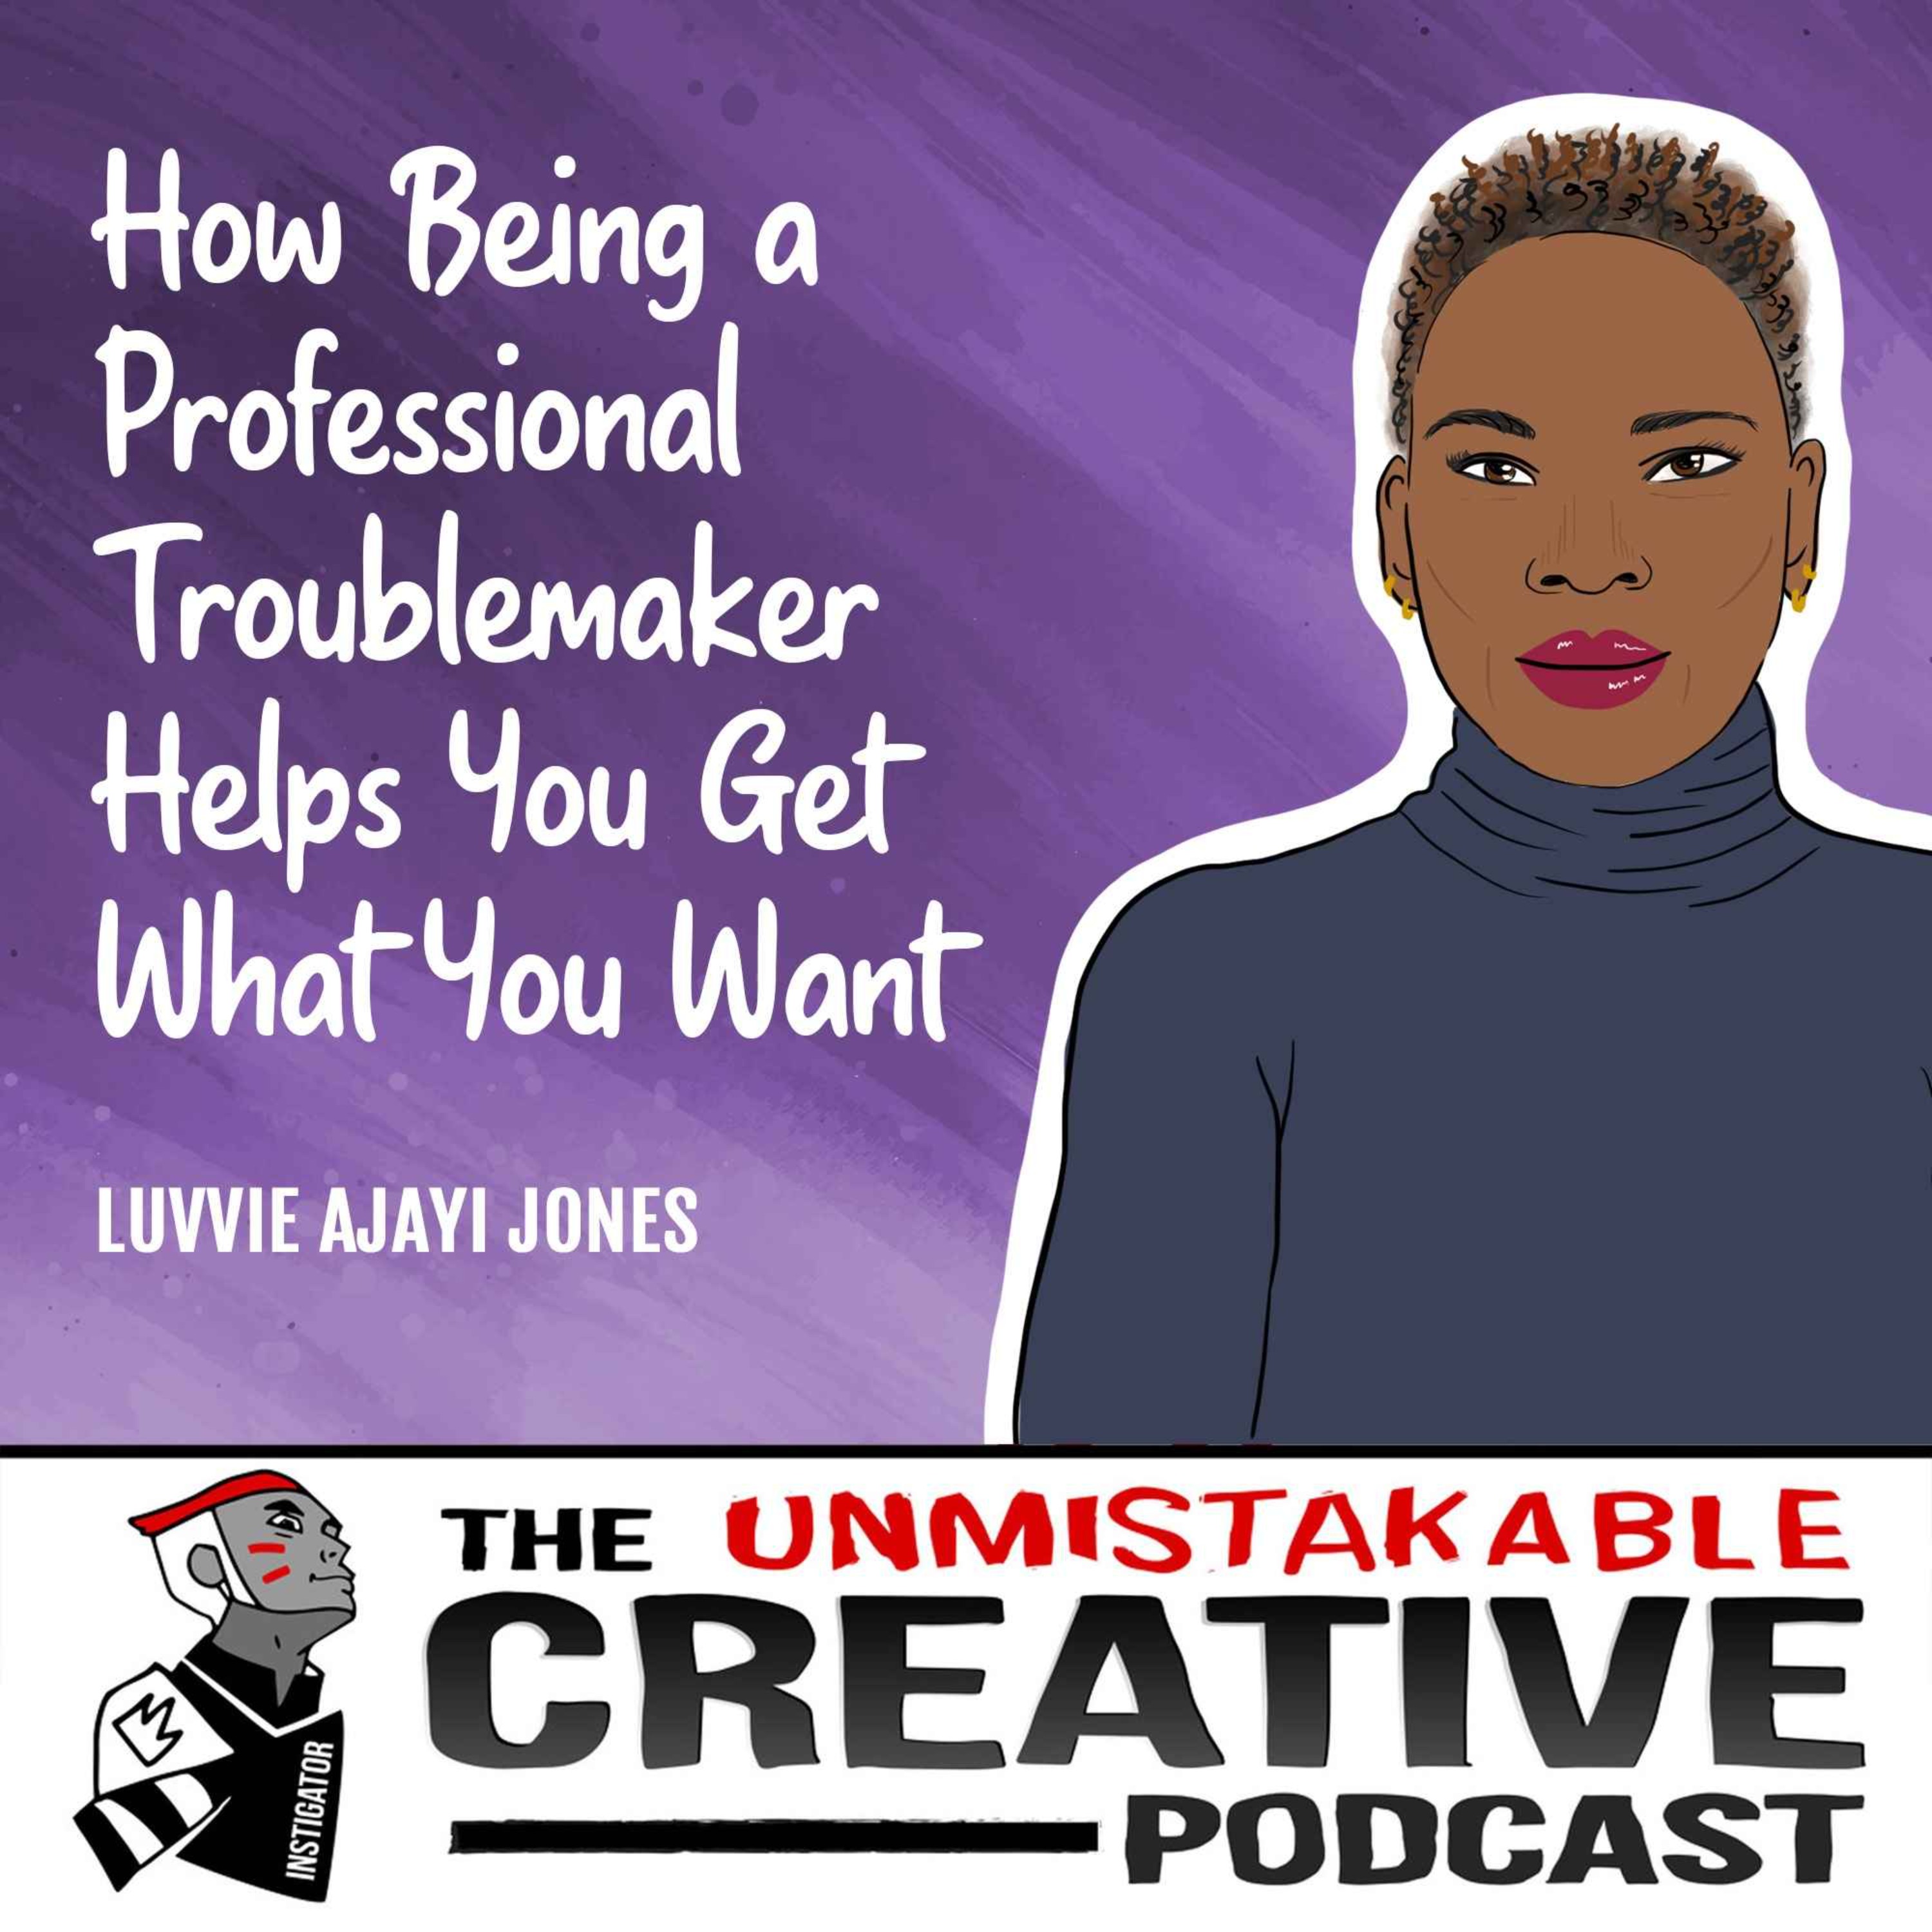 Luvvie Ajayi Jones | How Being a Professional Troublemaker Helps You Get What You Want